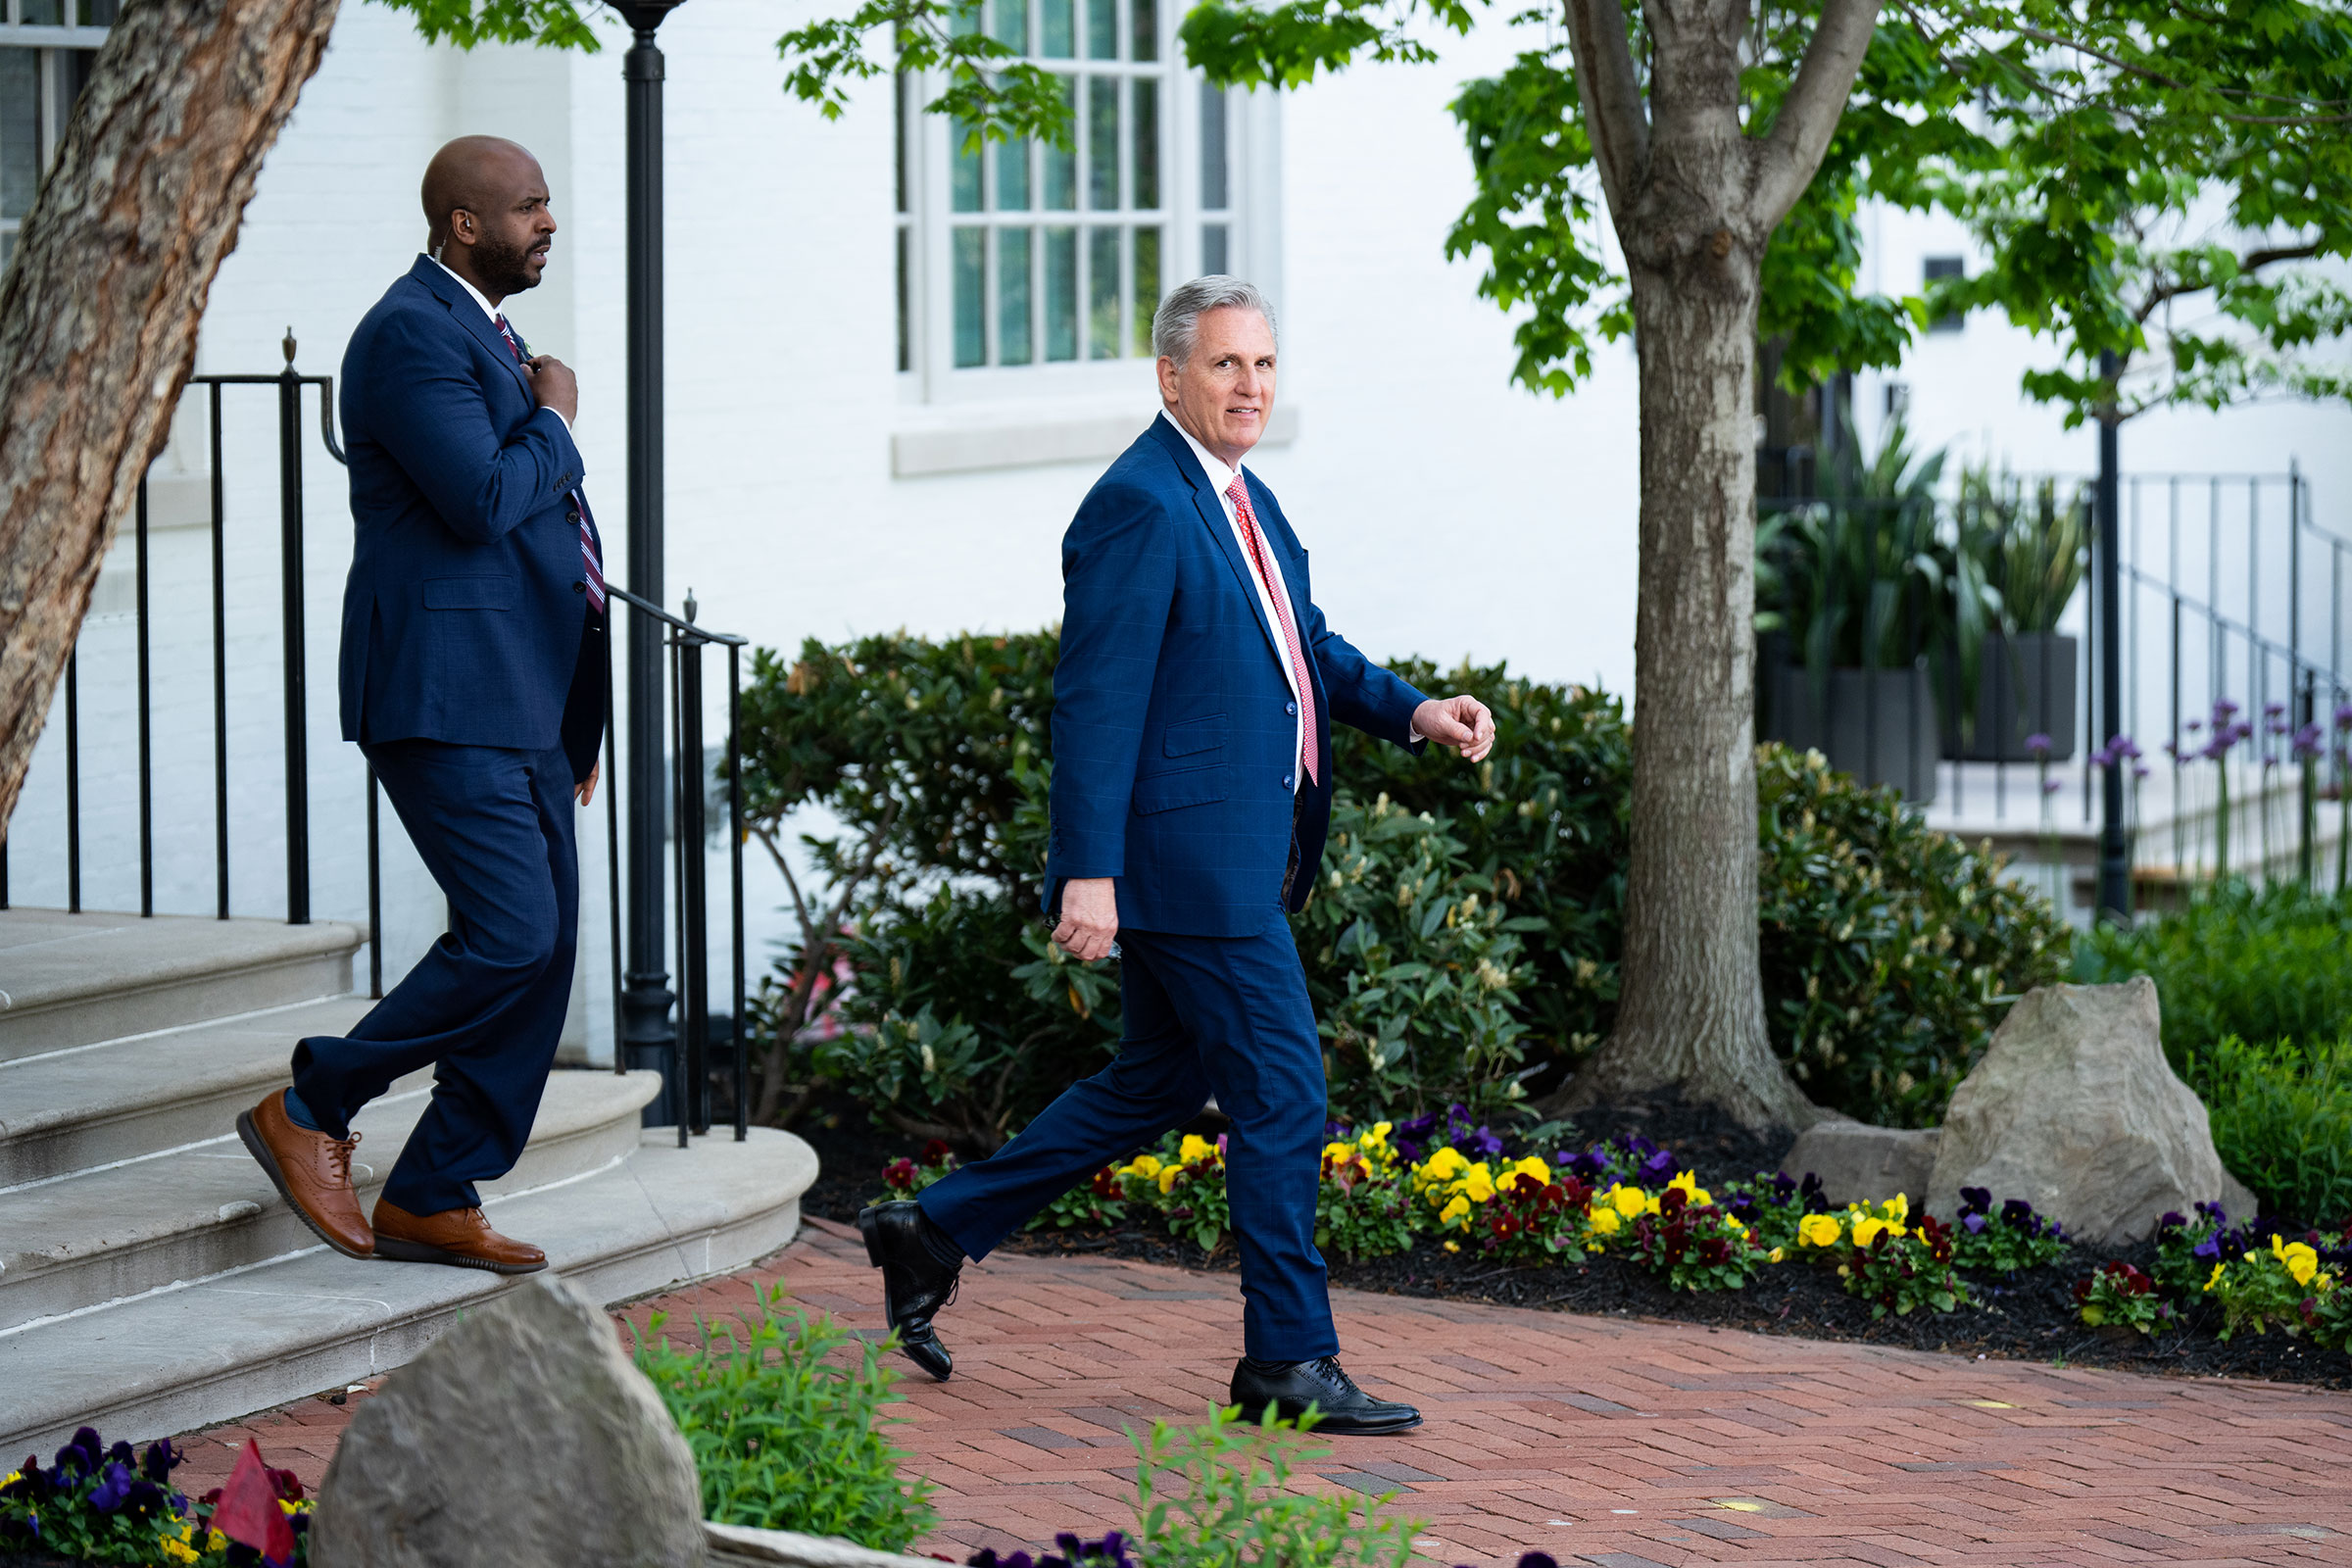 House Minority Leader Kevin McCarthy exits the headquarters of the Republican National Committee after the House Republican Conference caucus meeting in Washington on April 27, 2022. (Bill Clark—CQ-Roll Call/Getty Images)